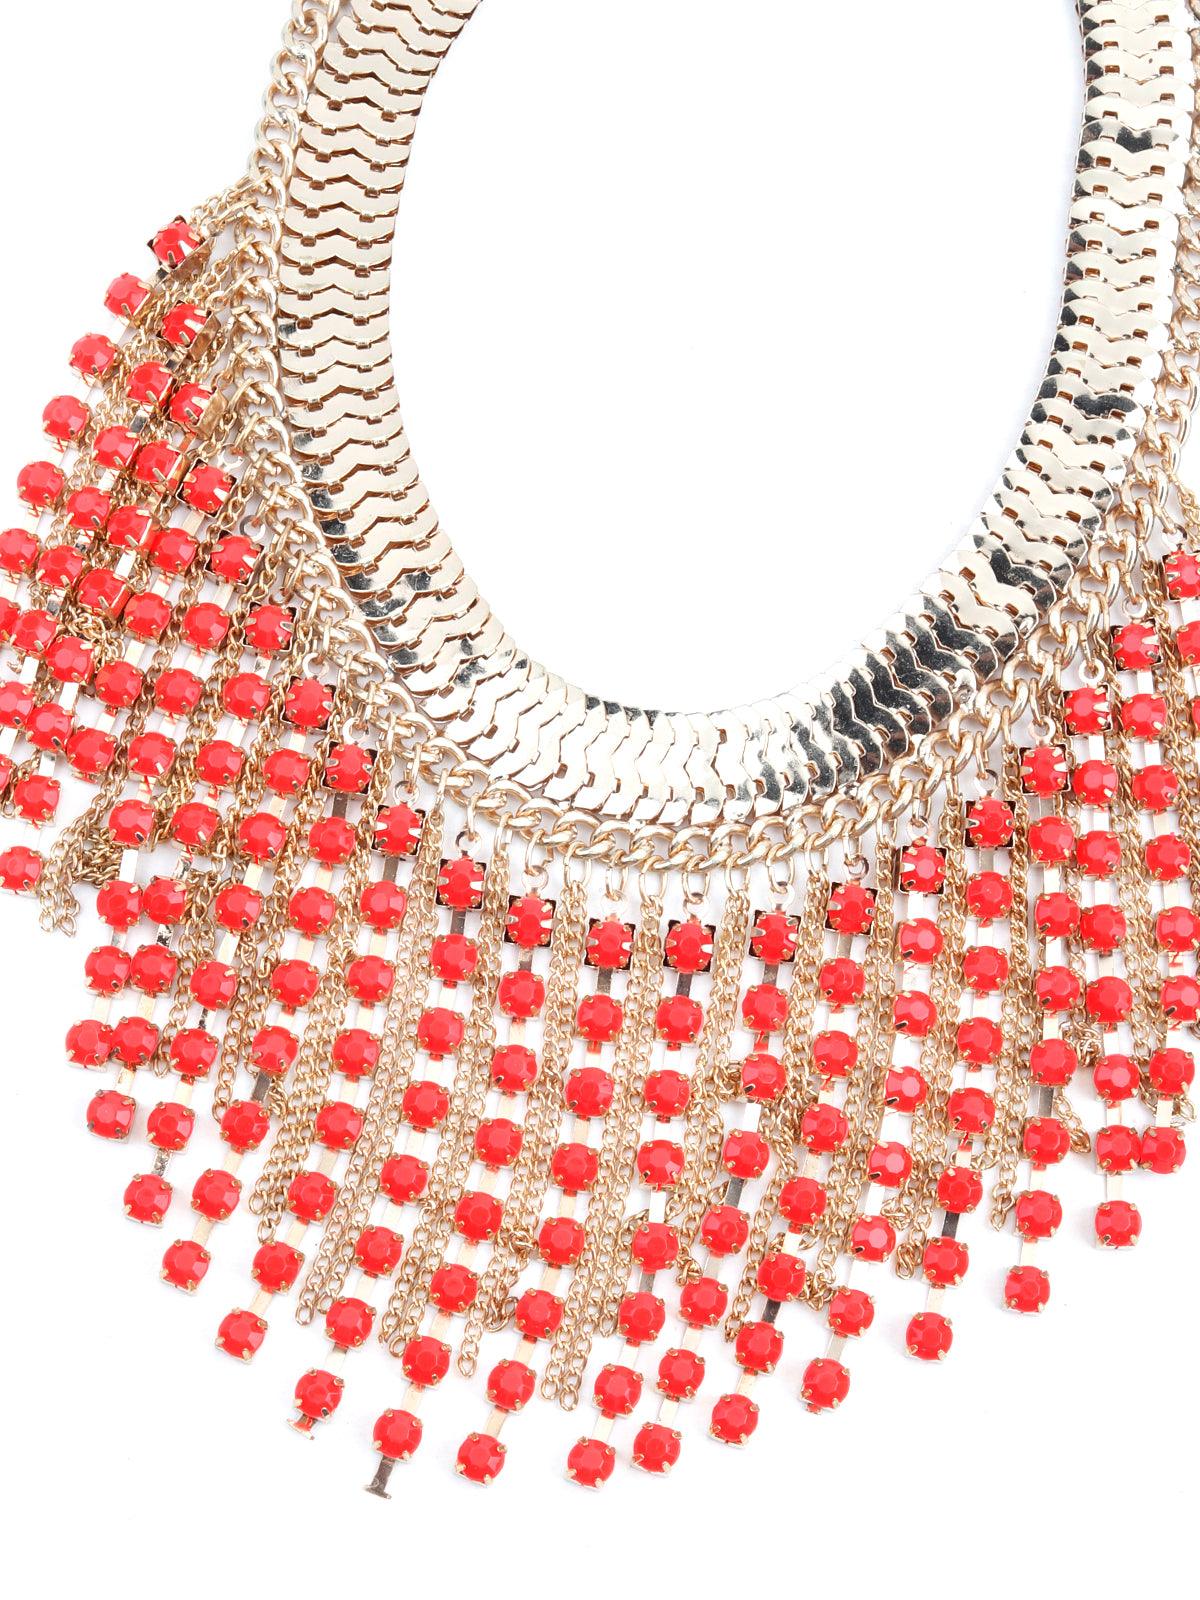 Chunky gold metallic fringe necklace with red stone droppings - Odette